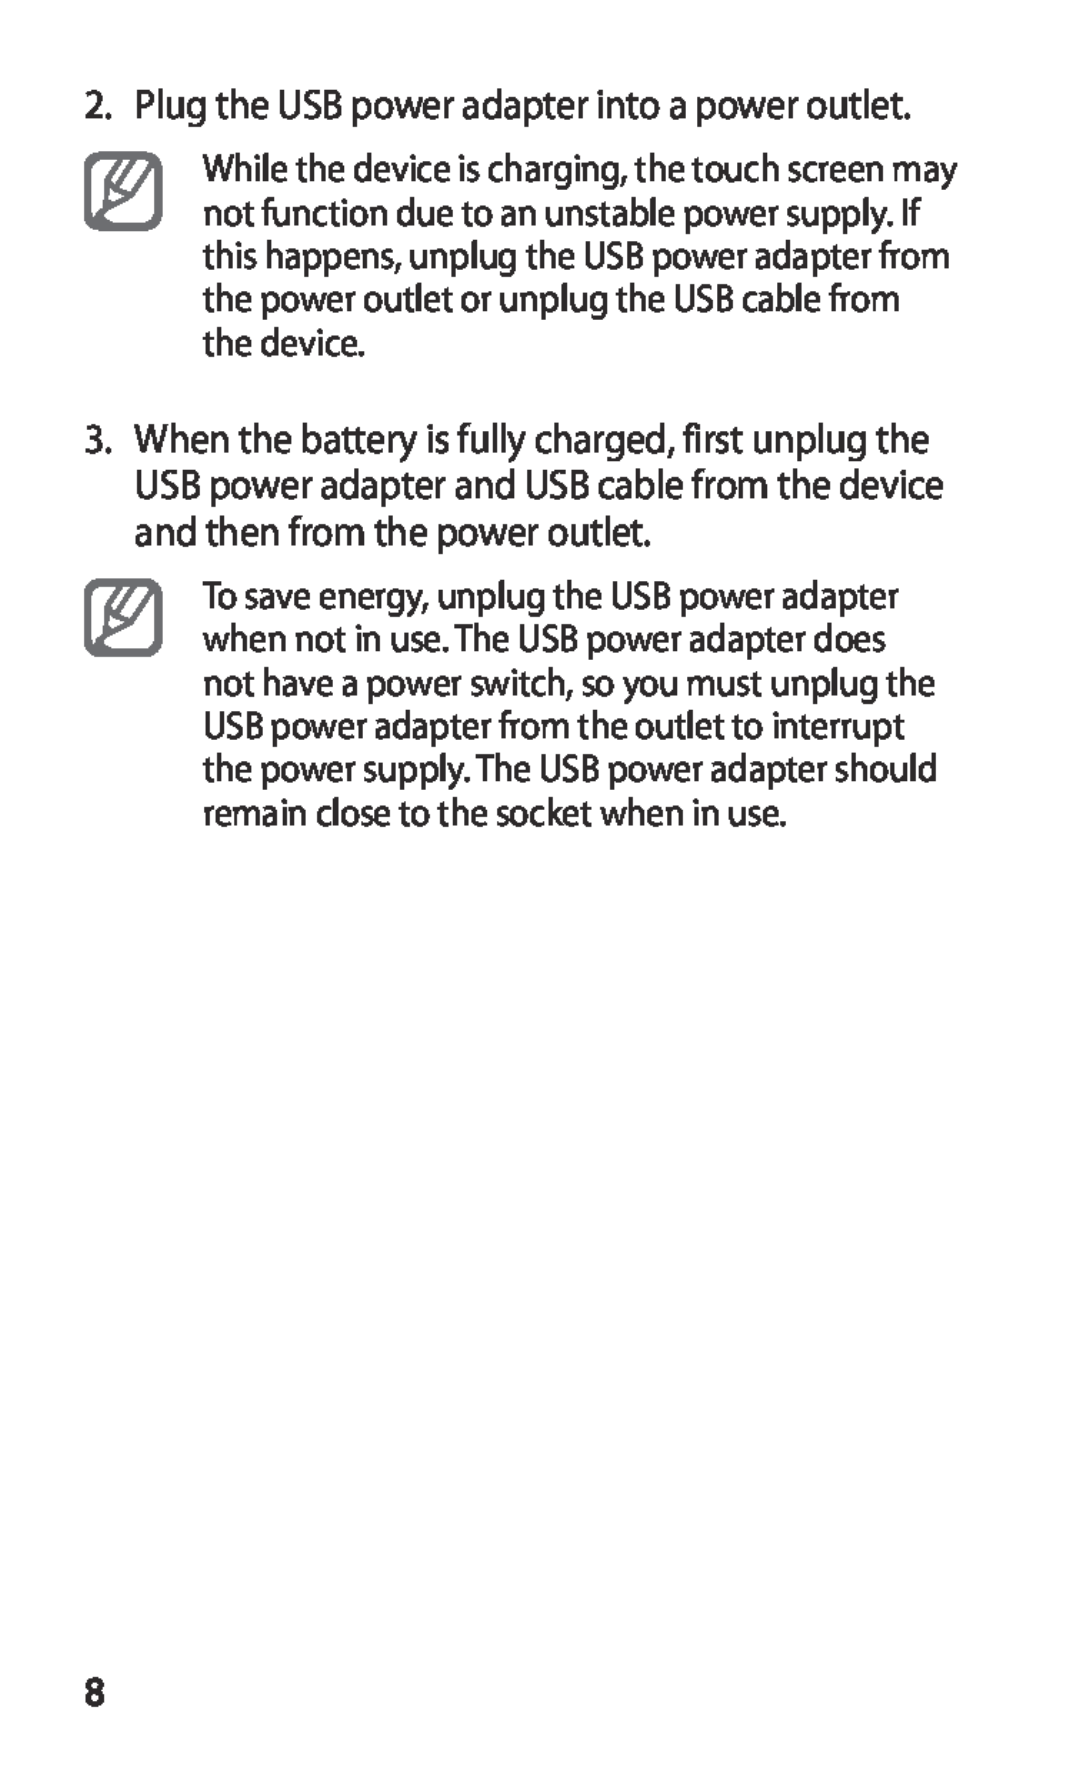 Samsung GT-P7300UWEKSA, GT-P7300FKAARB, GT-P7300FKEJED, GT-P7300UWAAFR manual Plug the USB power adapter into a power outlet 